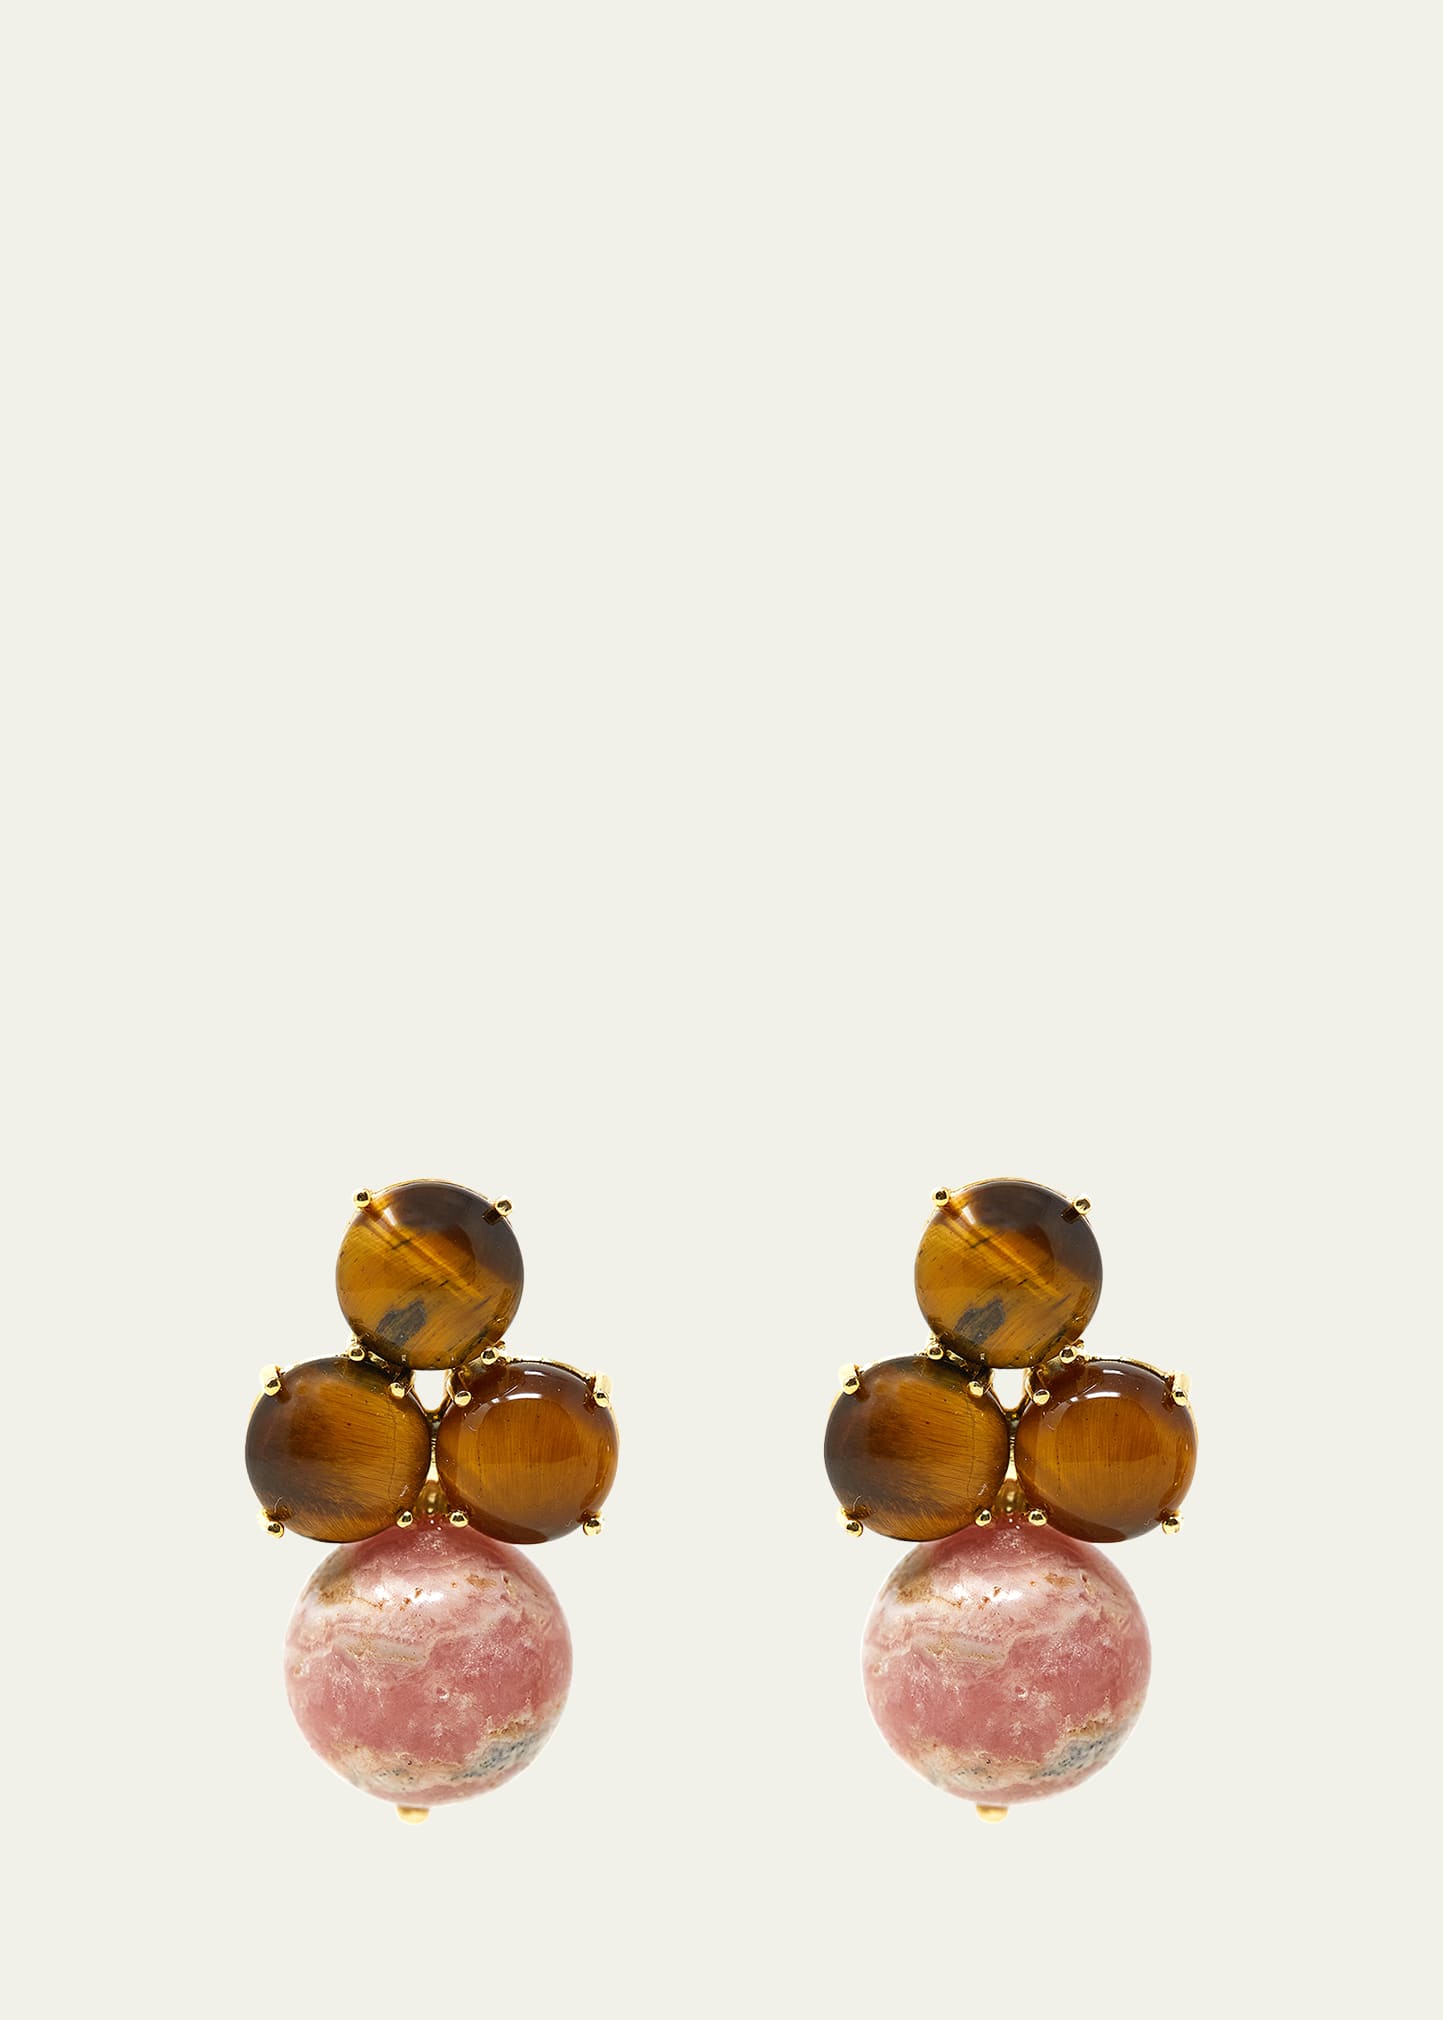 Grazia And Marica Vozza 14k Yellow Gold Stud Earrings With Rhodochrosite And Tiger Eye In Yg